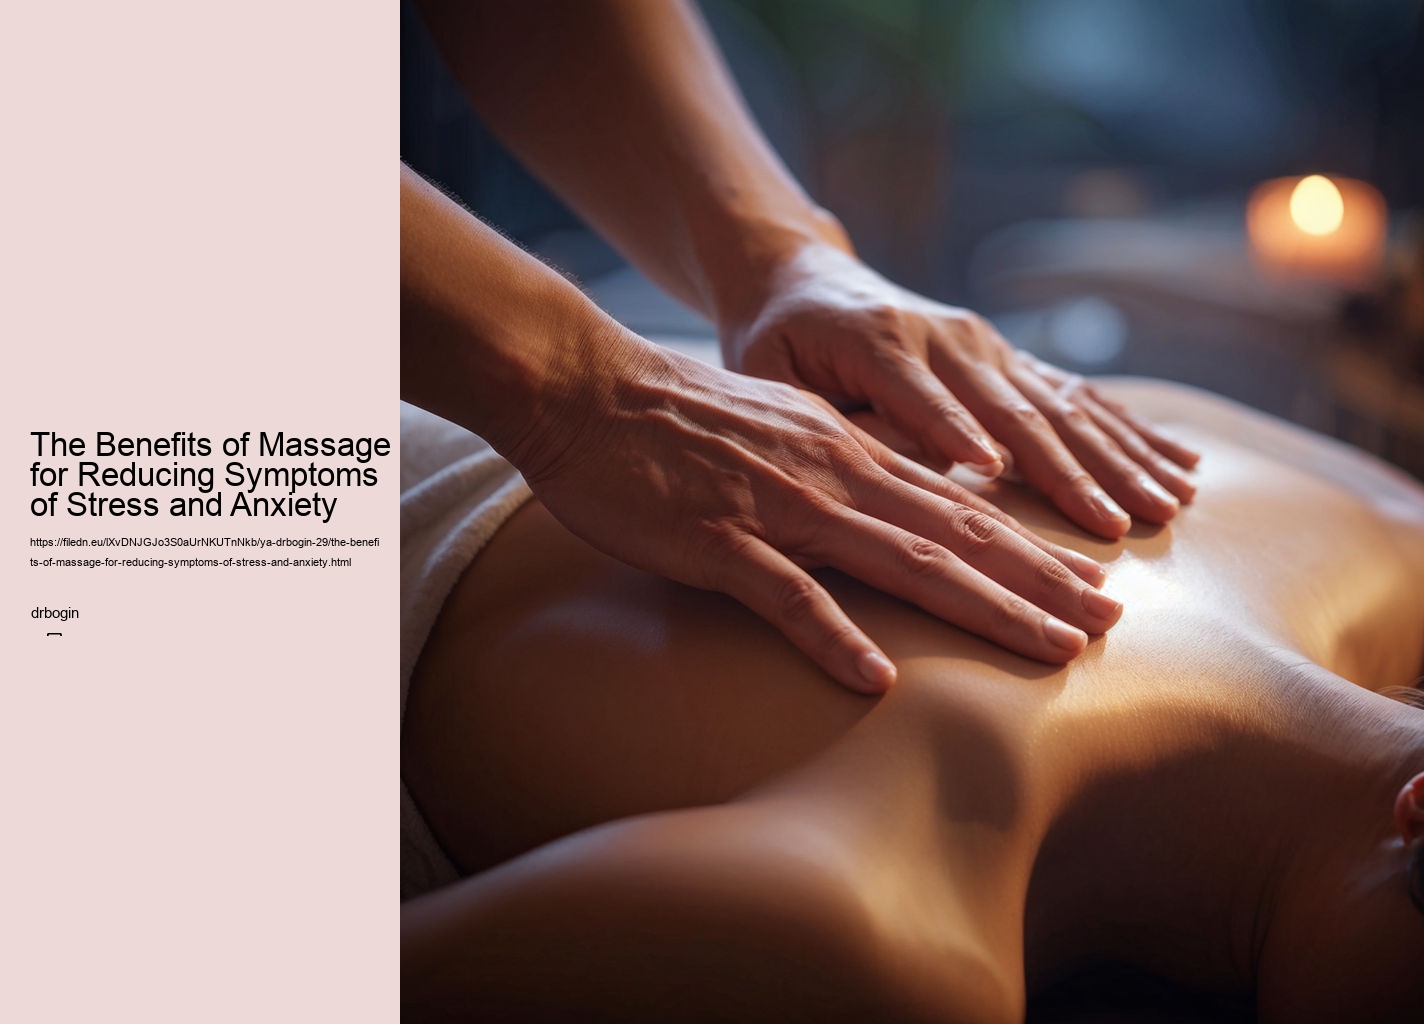 The Benefits of Massage for Reducing Symptoms of Stress and Anxiety